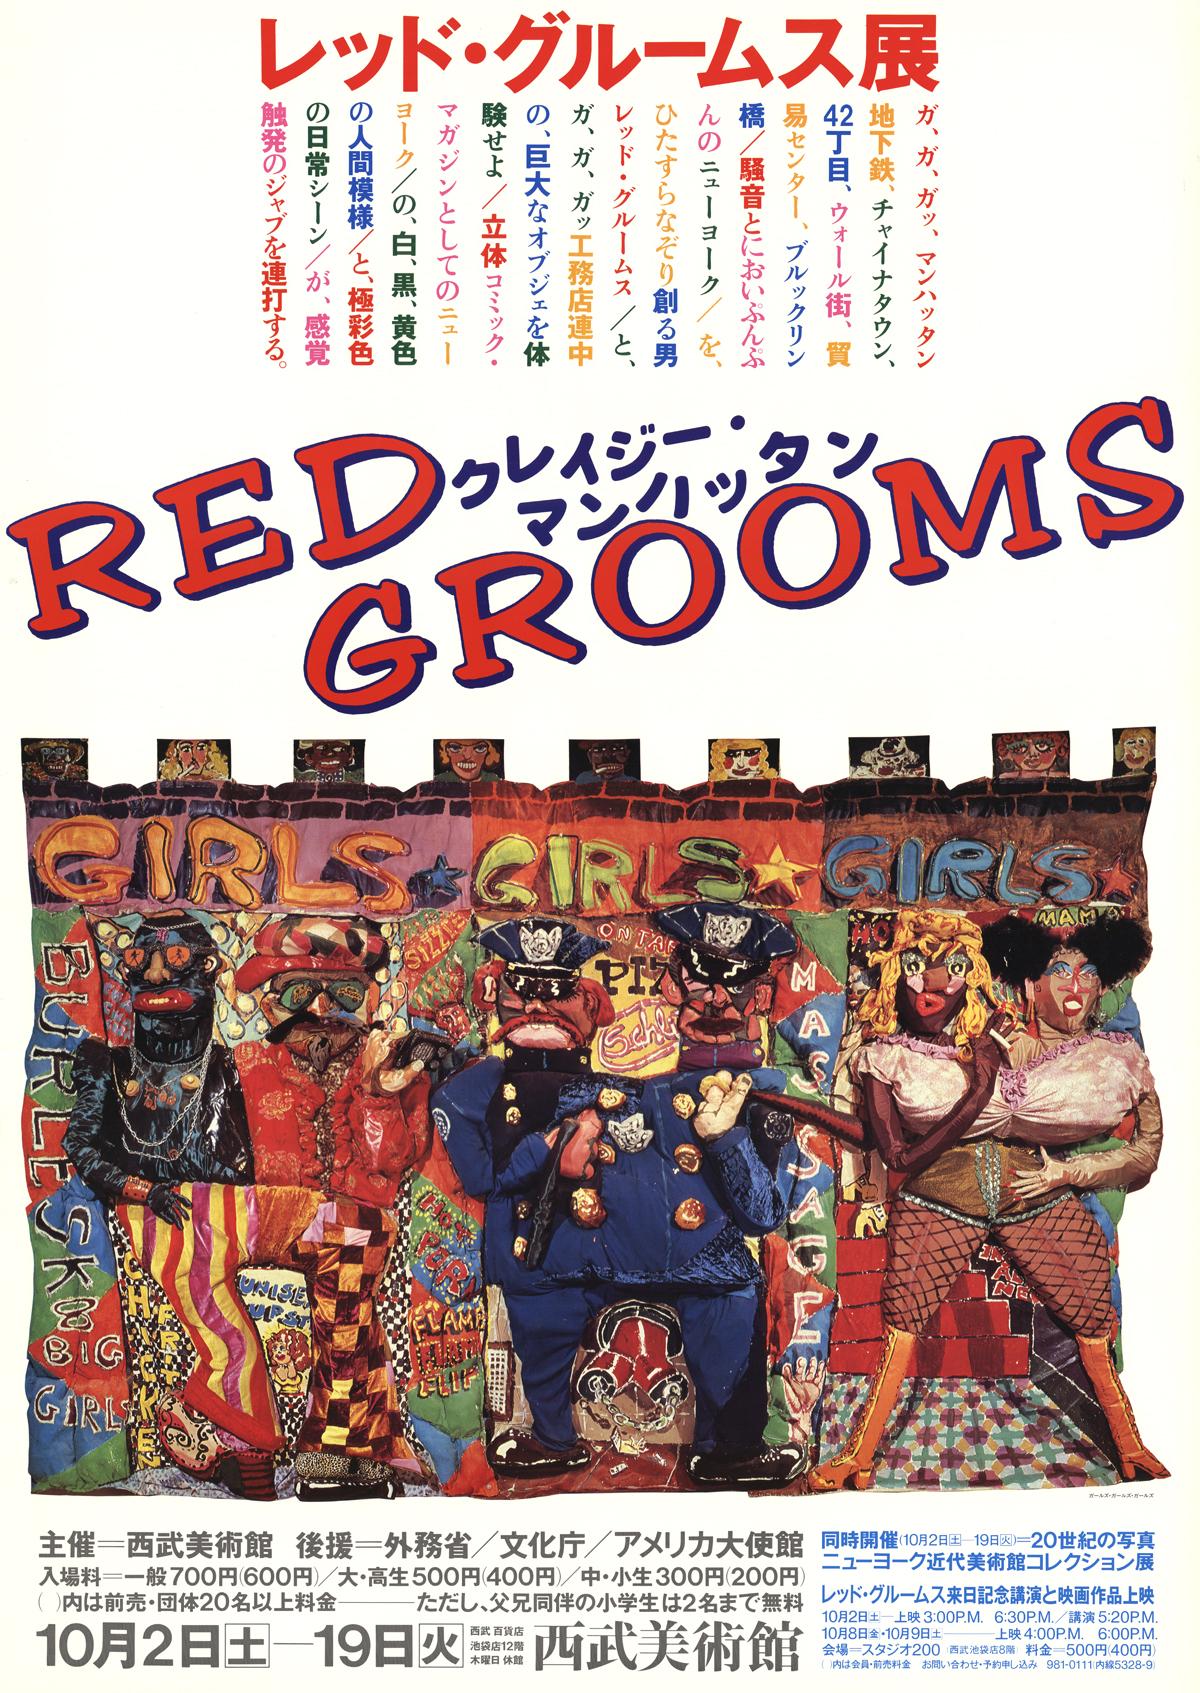 Red Grooms-Girls Girls Girls-40.25" x 28.5"-Poster-1982-Multicolor
